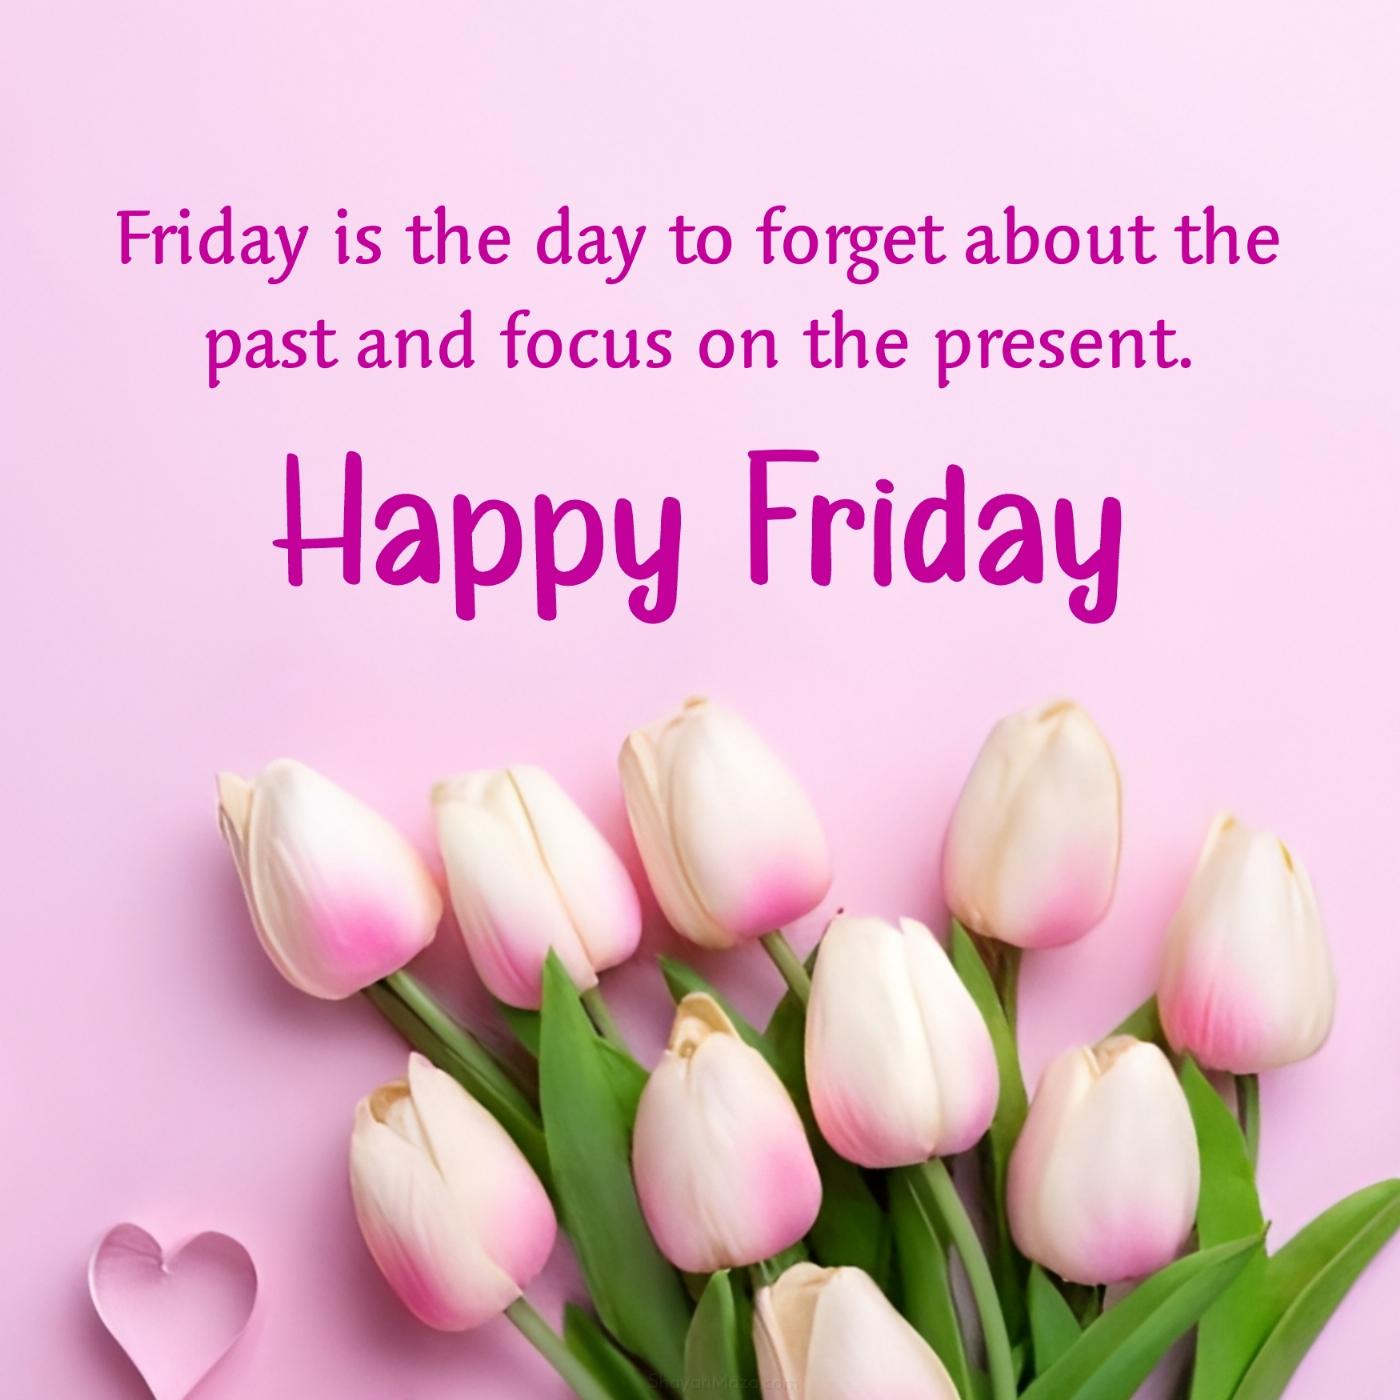 Friday is the day to forget about the past and focus on the present